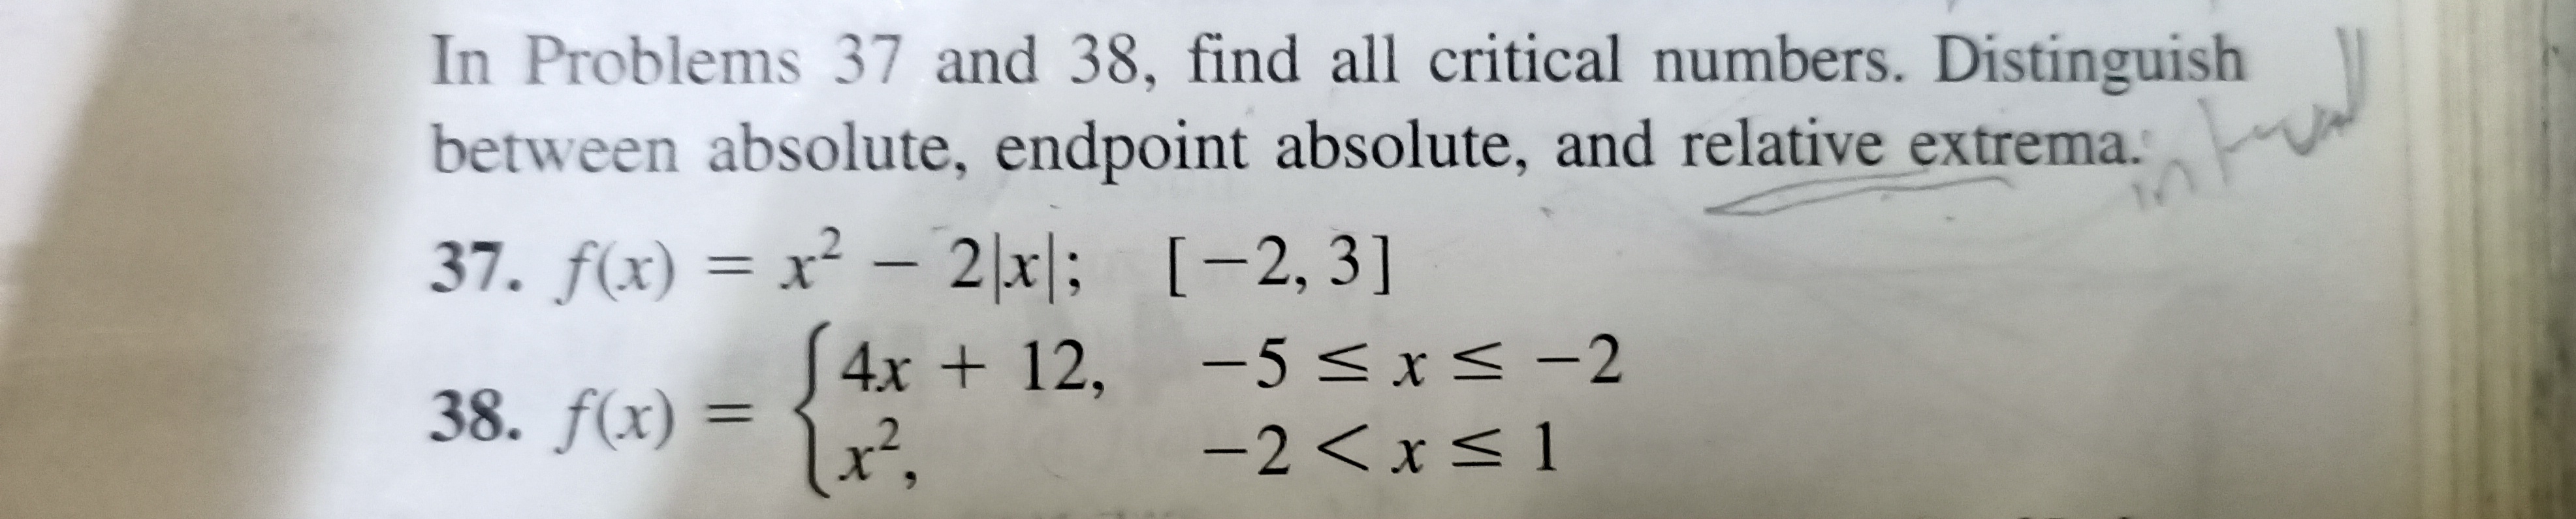 In Problems 37 and 38, find all critical numbers. Distinguish
between absolute, endpoint absolute, and relative extrema.
37. f(x) = x² – 2|x|; [-2, 3]
